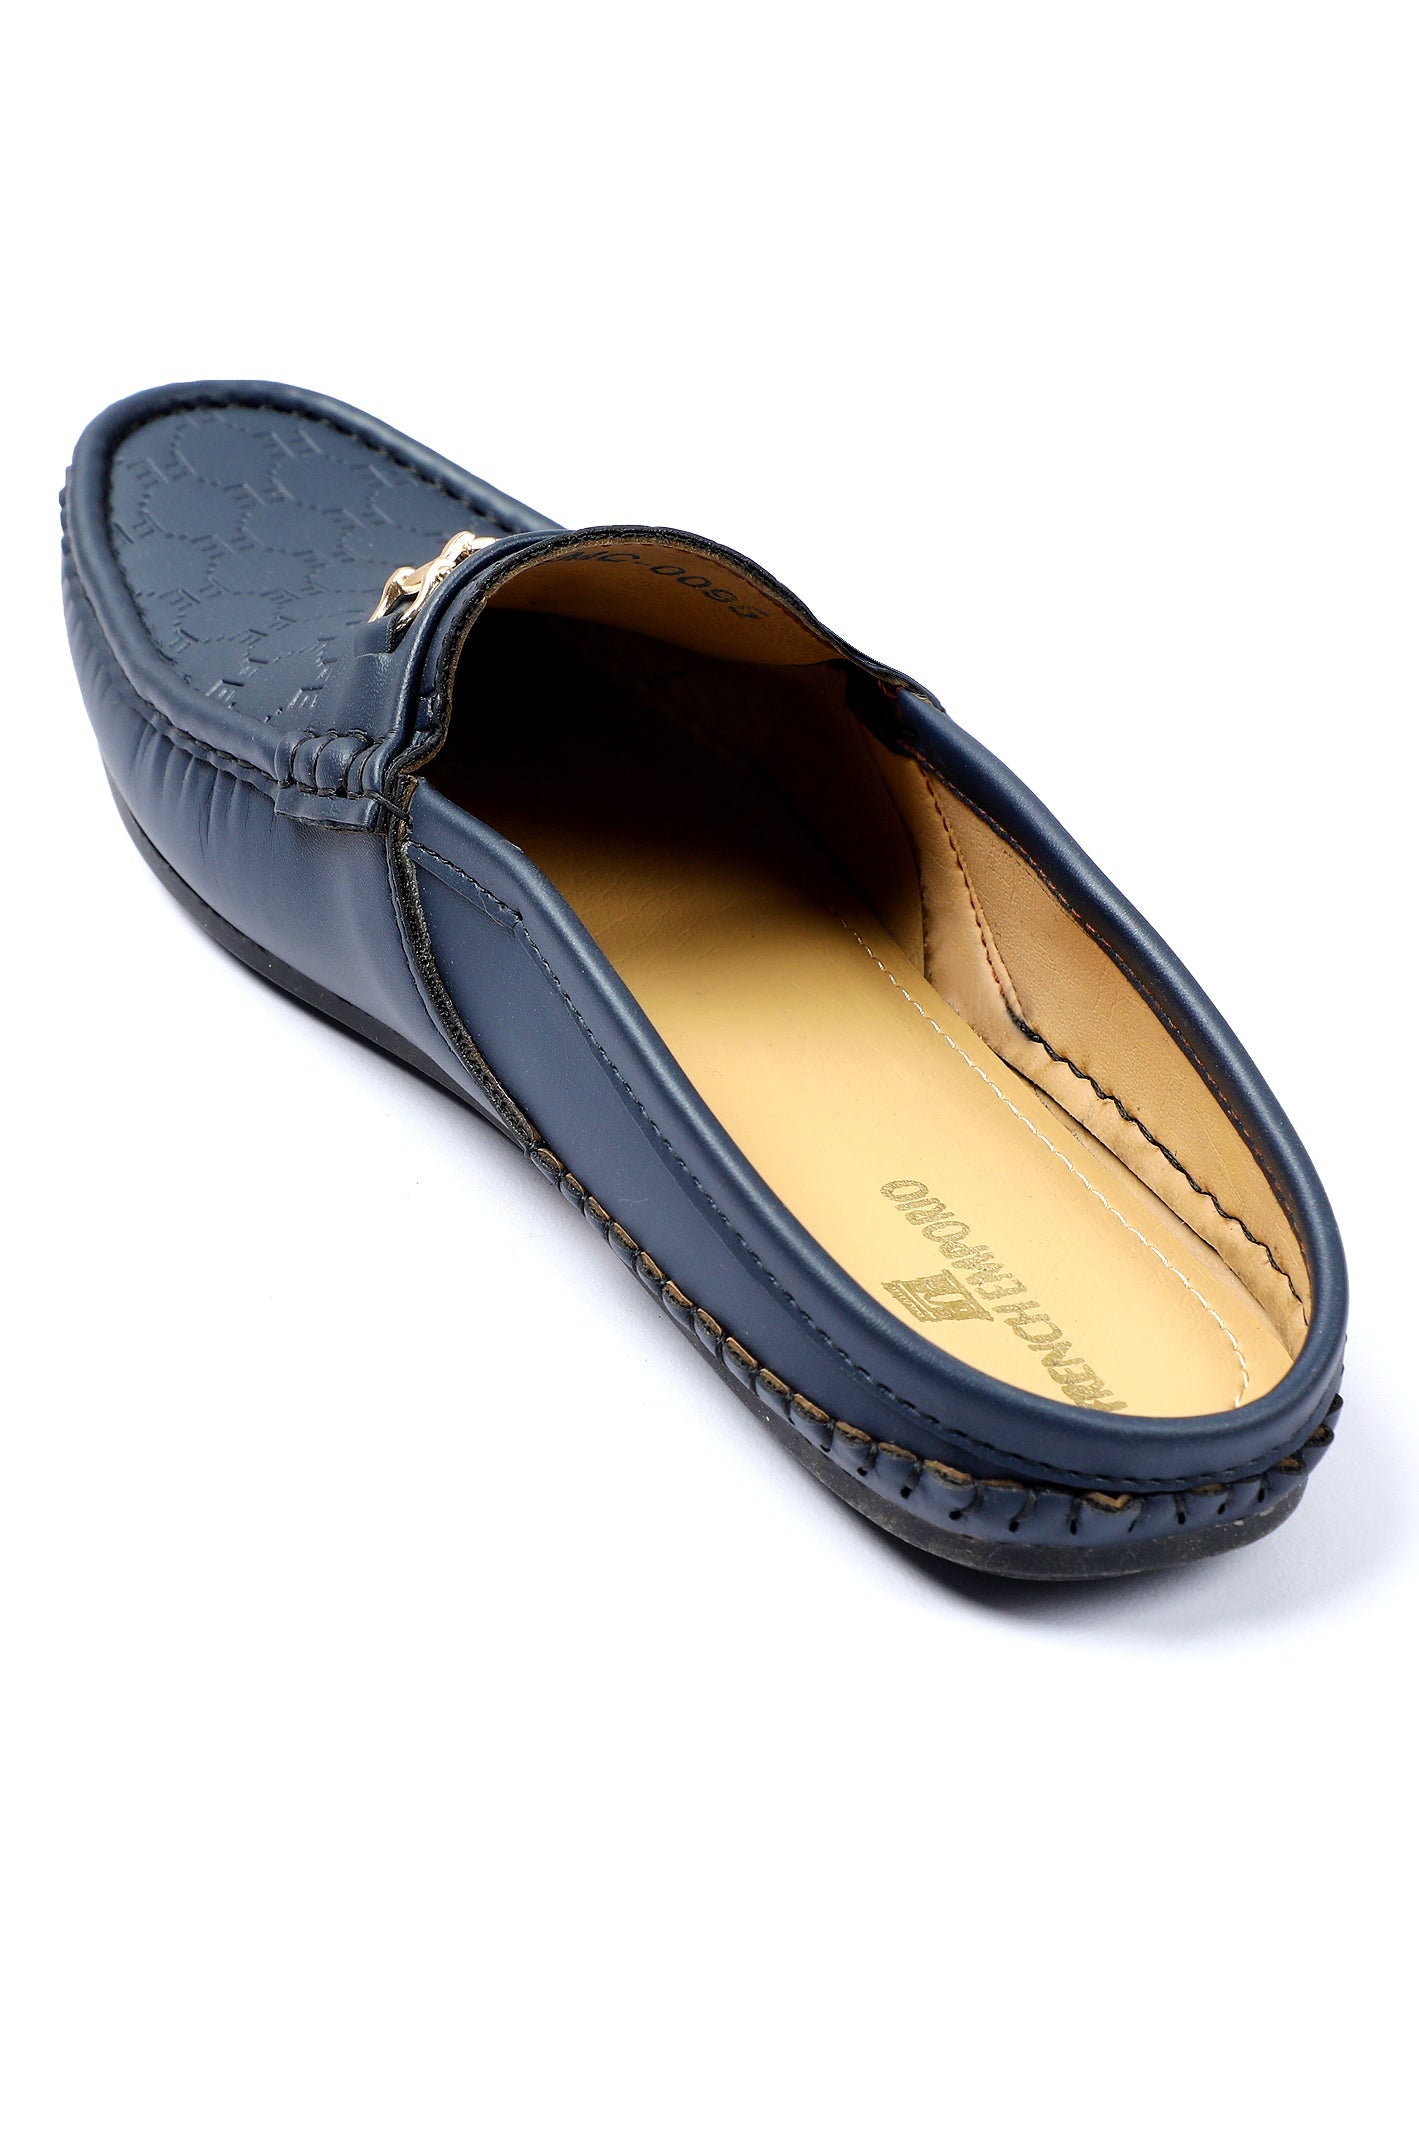 Casual Mule Shoes For Men SKU: SMC-0095-NAVY - Diners